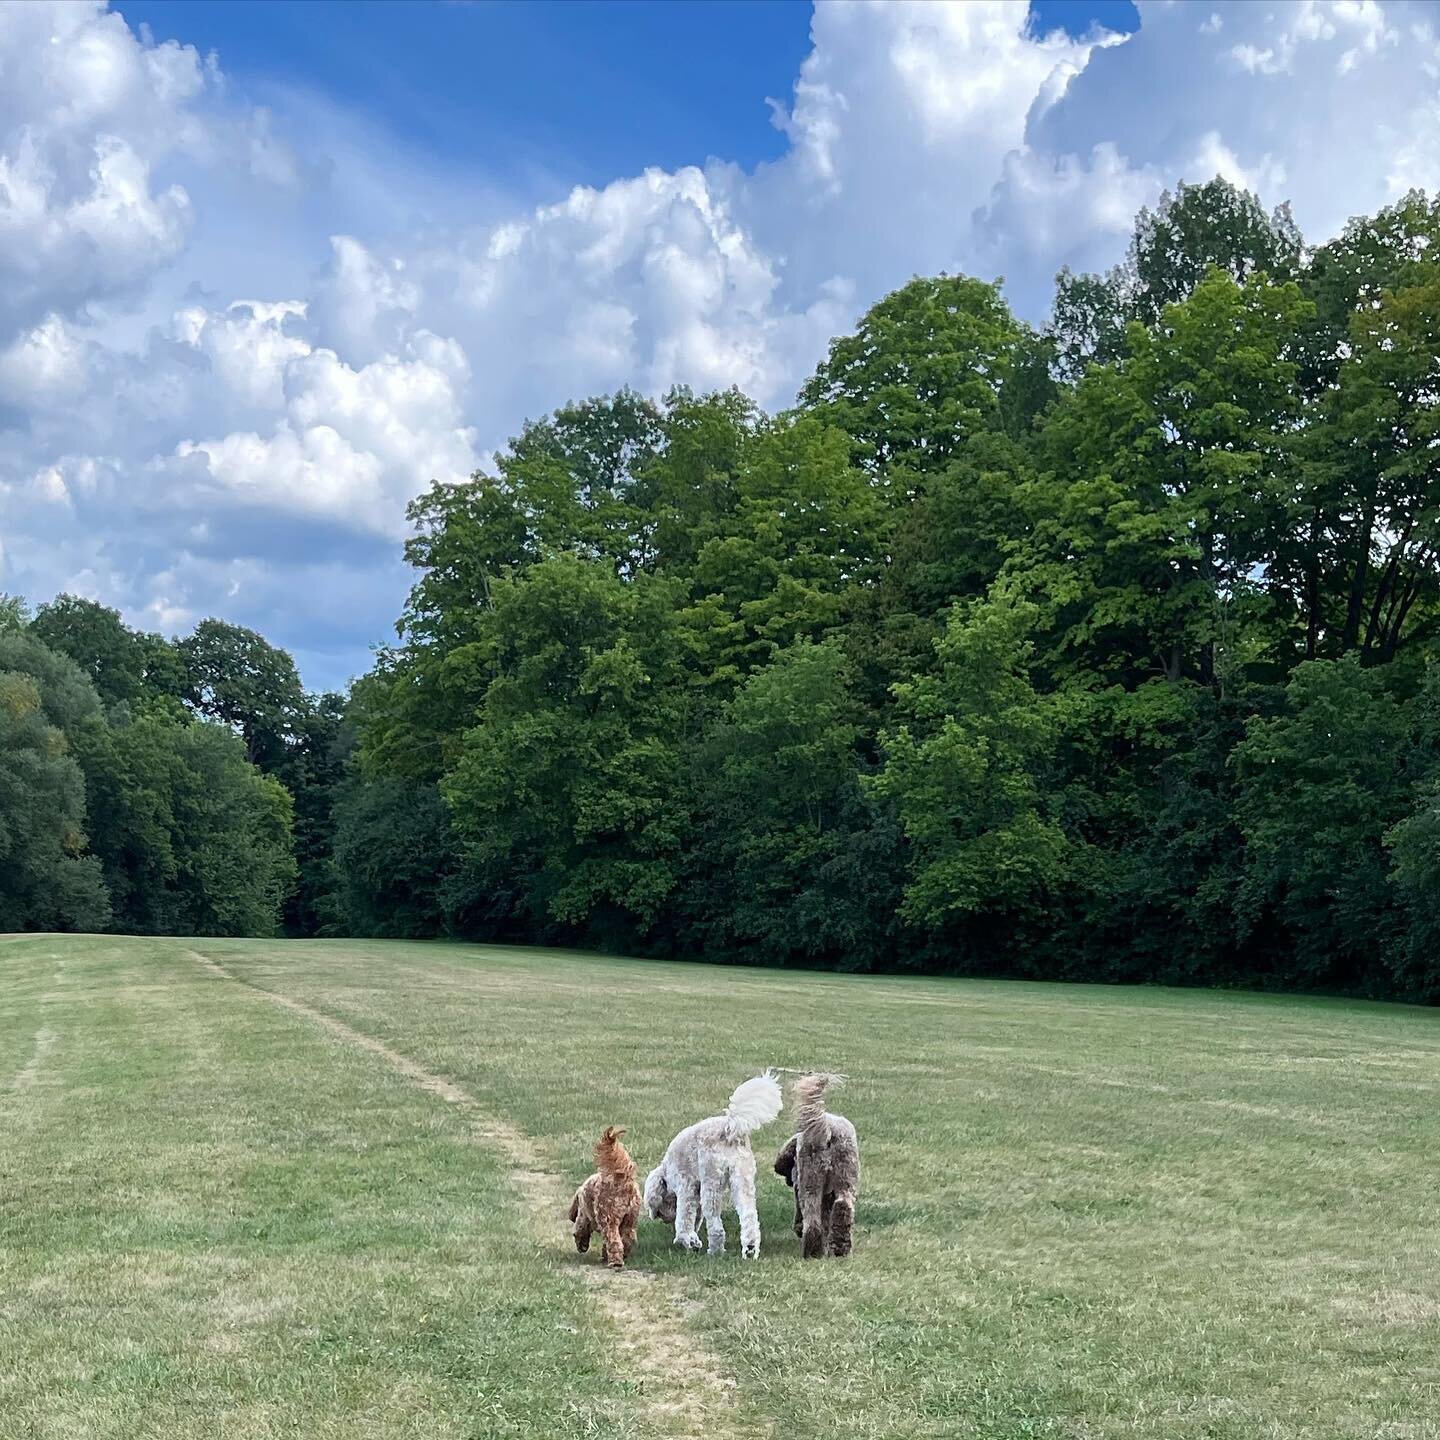 These three are ready for the #weekend! 🍑🍑🍑🐶 Ollie, Skyler and Harley are on a mission
#thepack #dogwalking #tgif #friends #doodlelove #doodle #puppies #summervibes #happydog